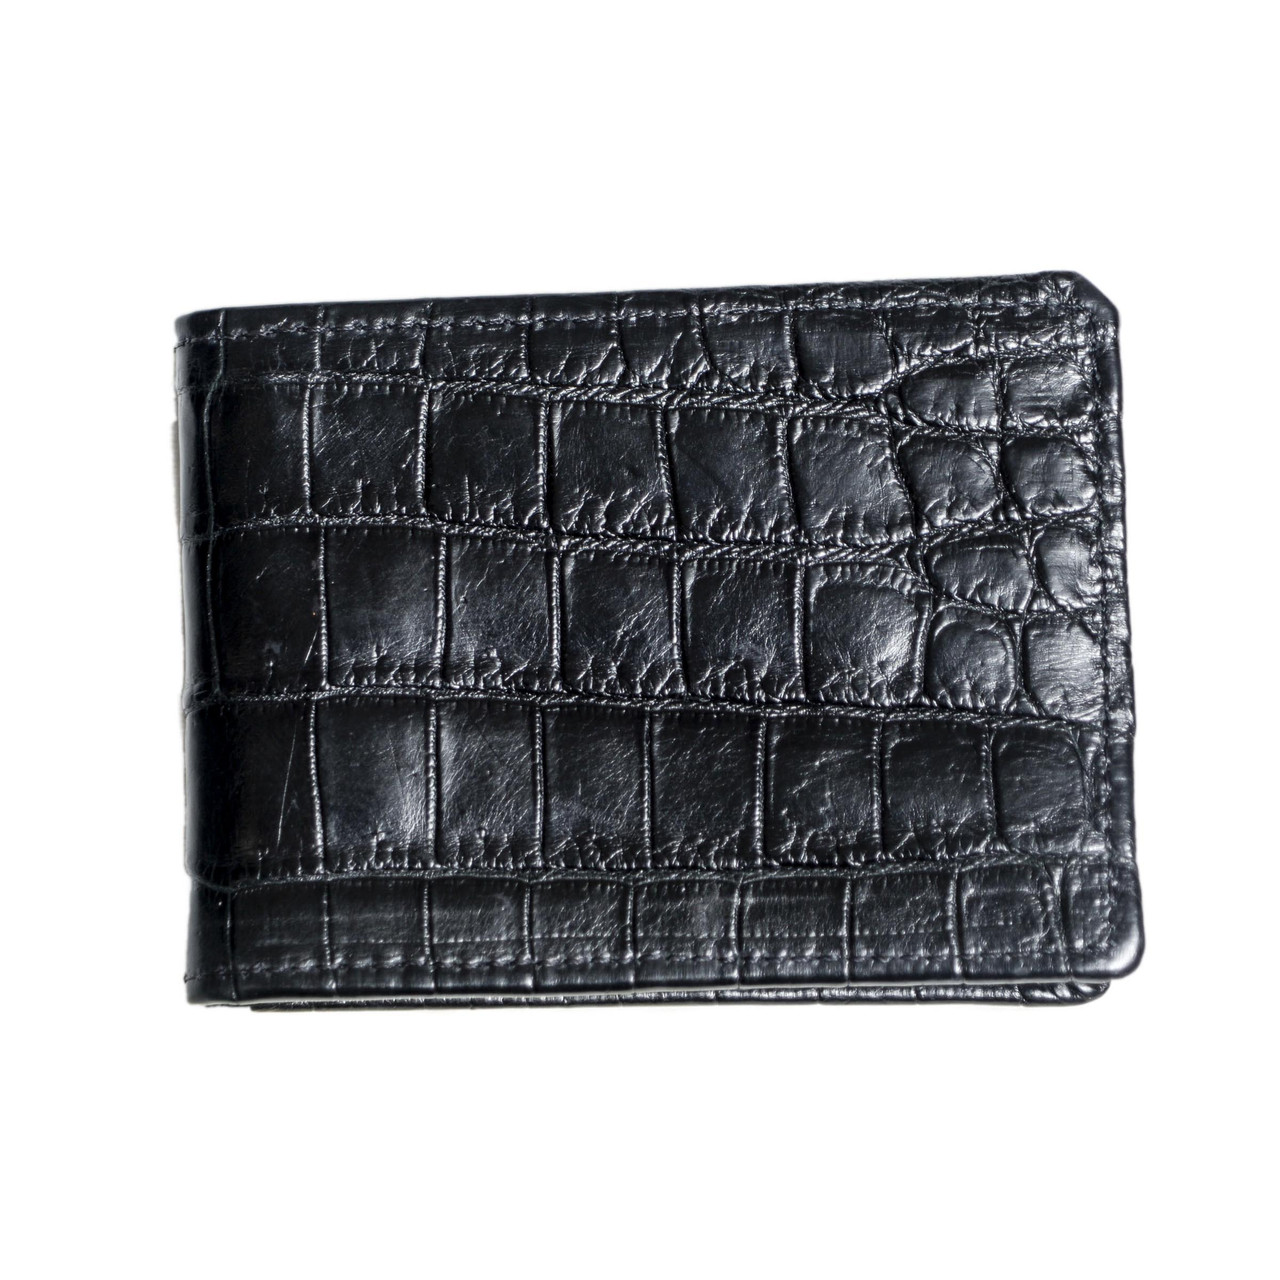 How To Make A Handmade Wallet Using EXOTIC LEATHER - Leather Craft